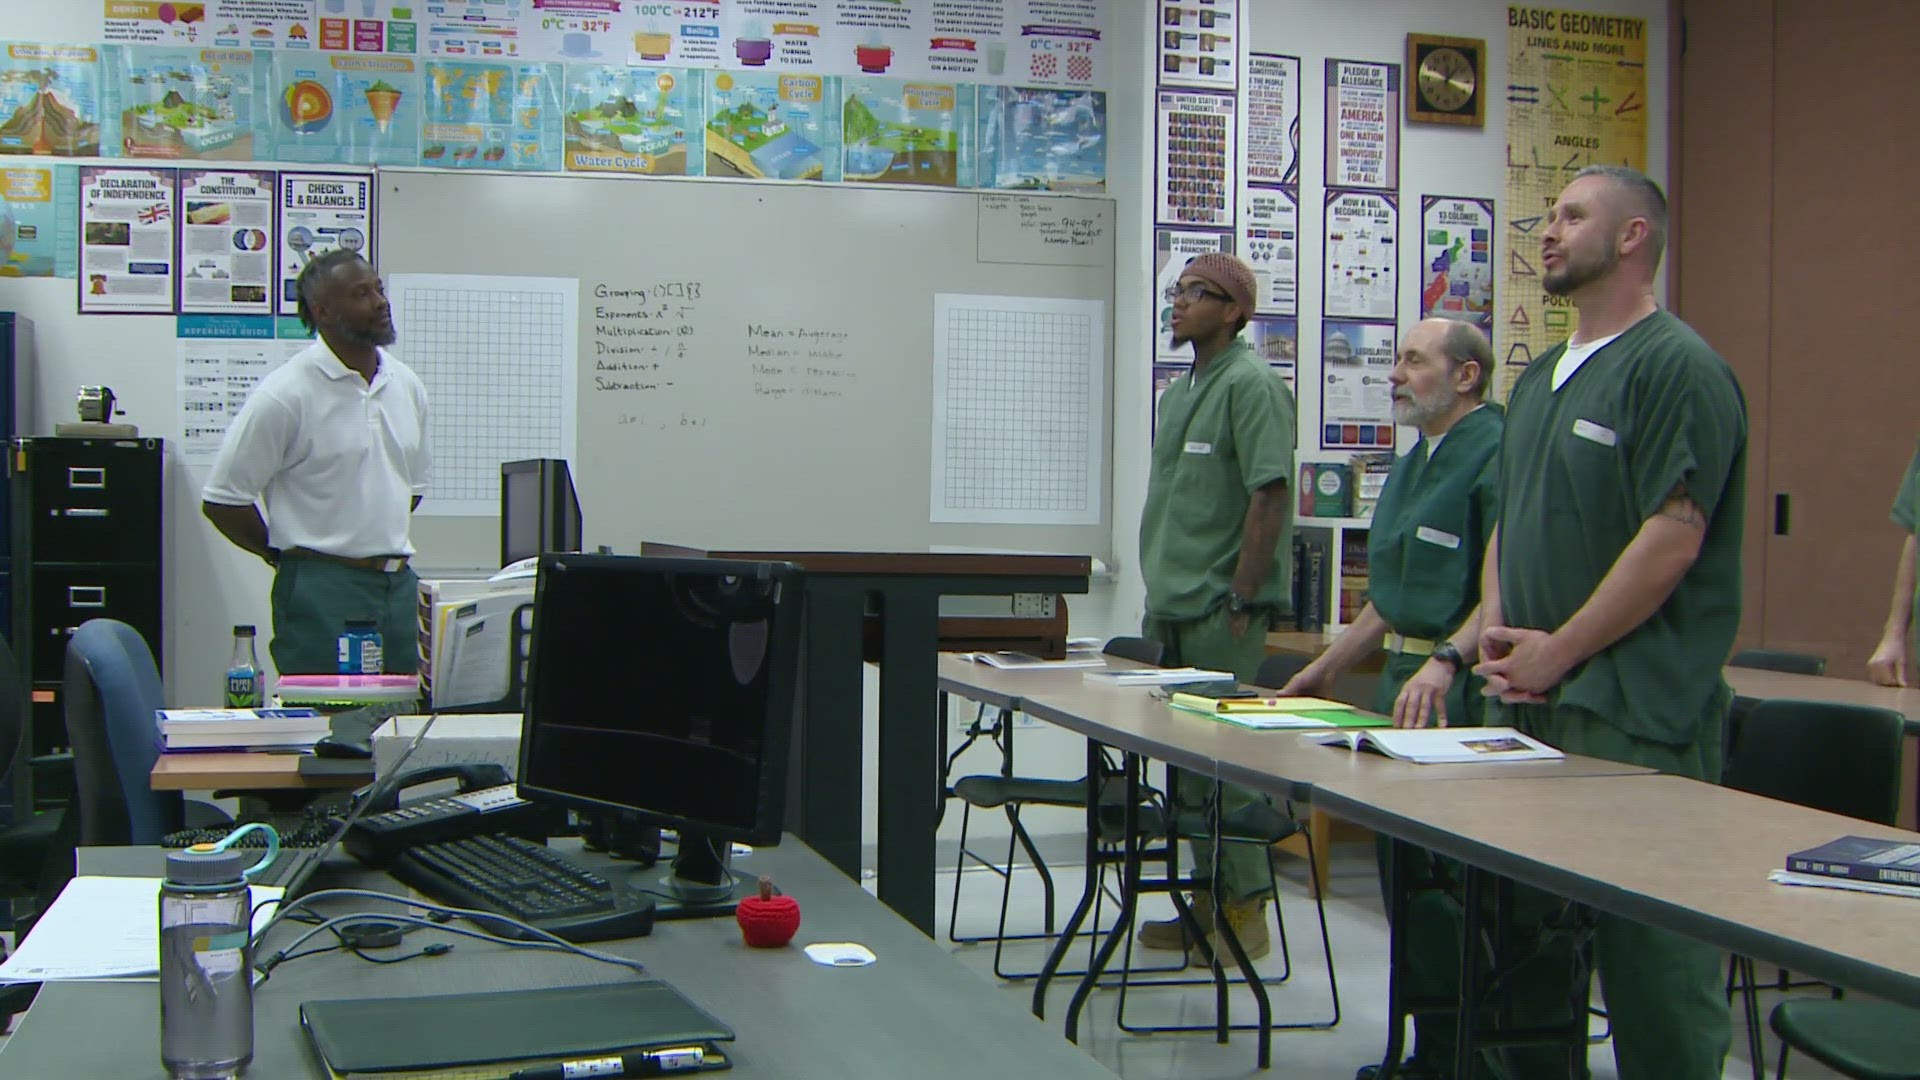 Colorado has one of the highest recidivism rates in the U.S. A program taught in prisons hopes to give inmates skills to help them succeed when they are released.